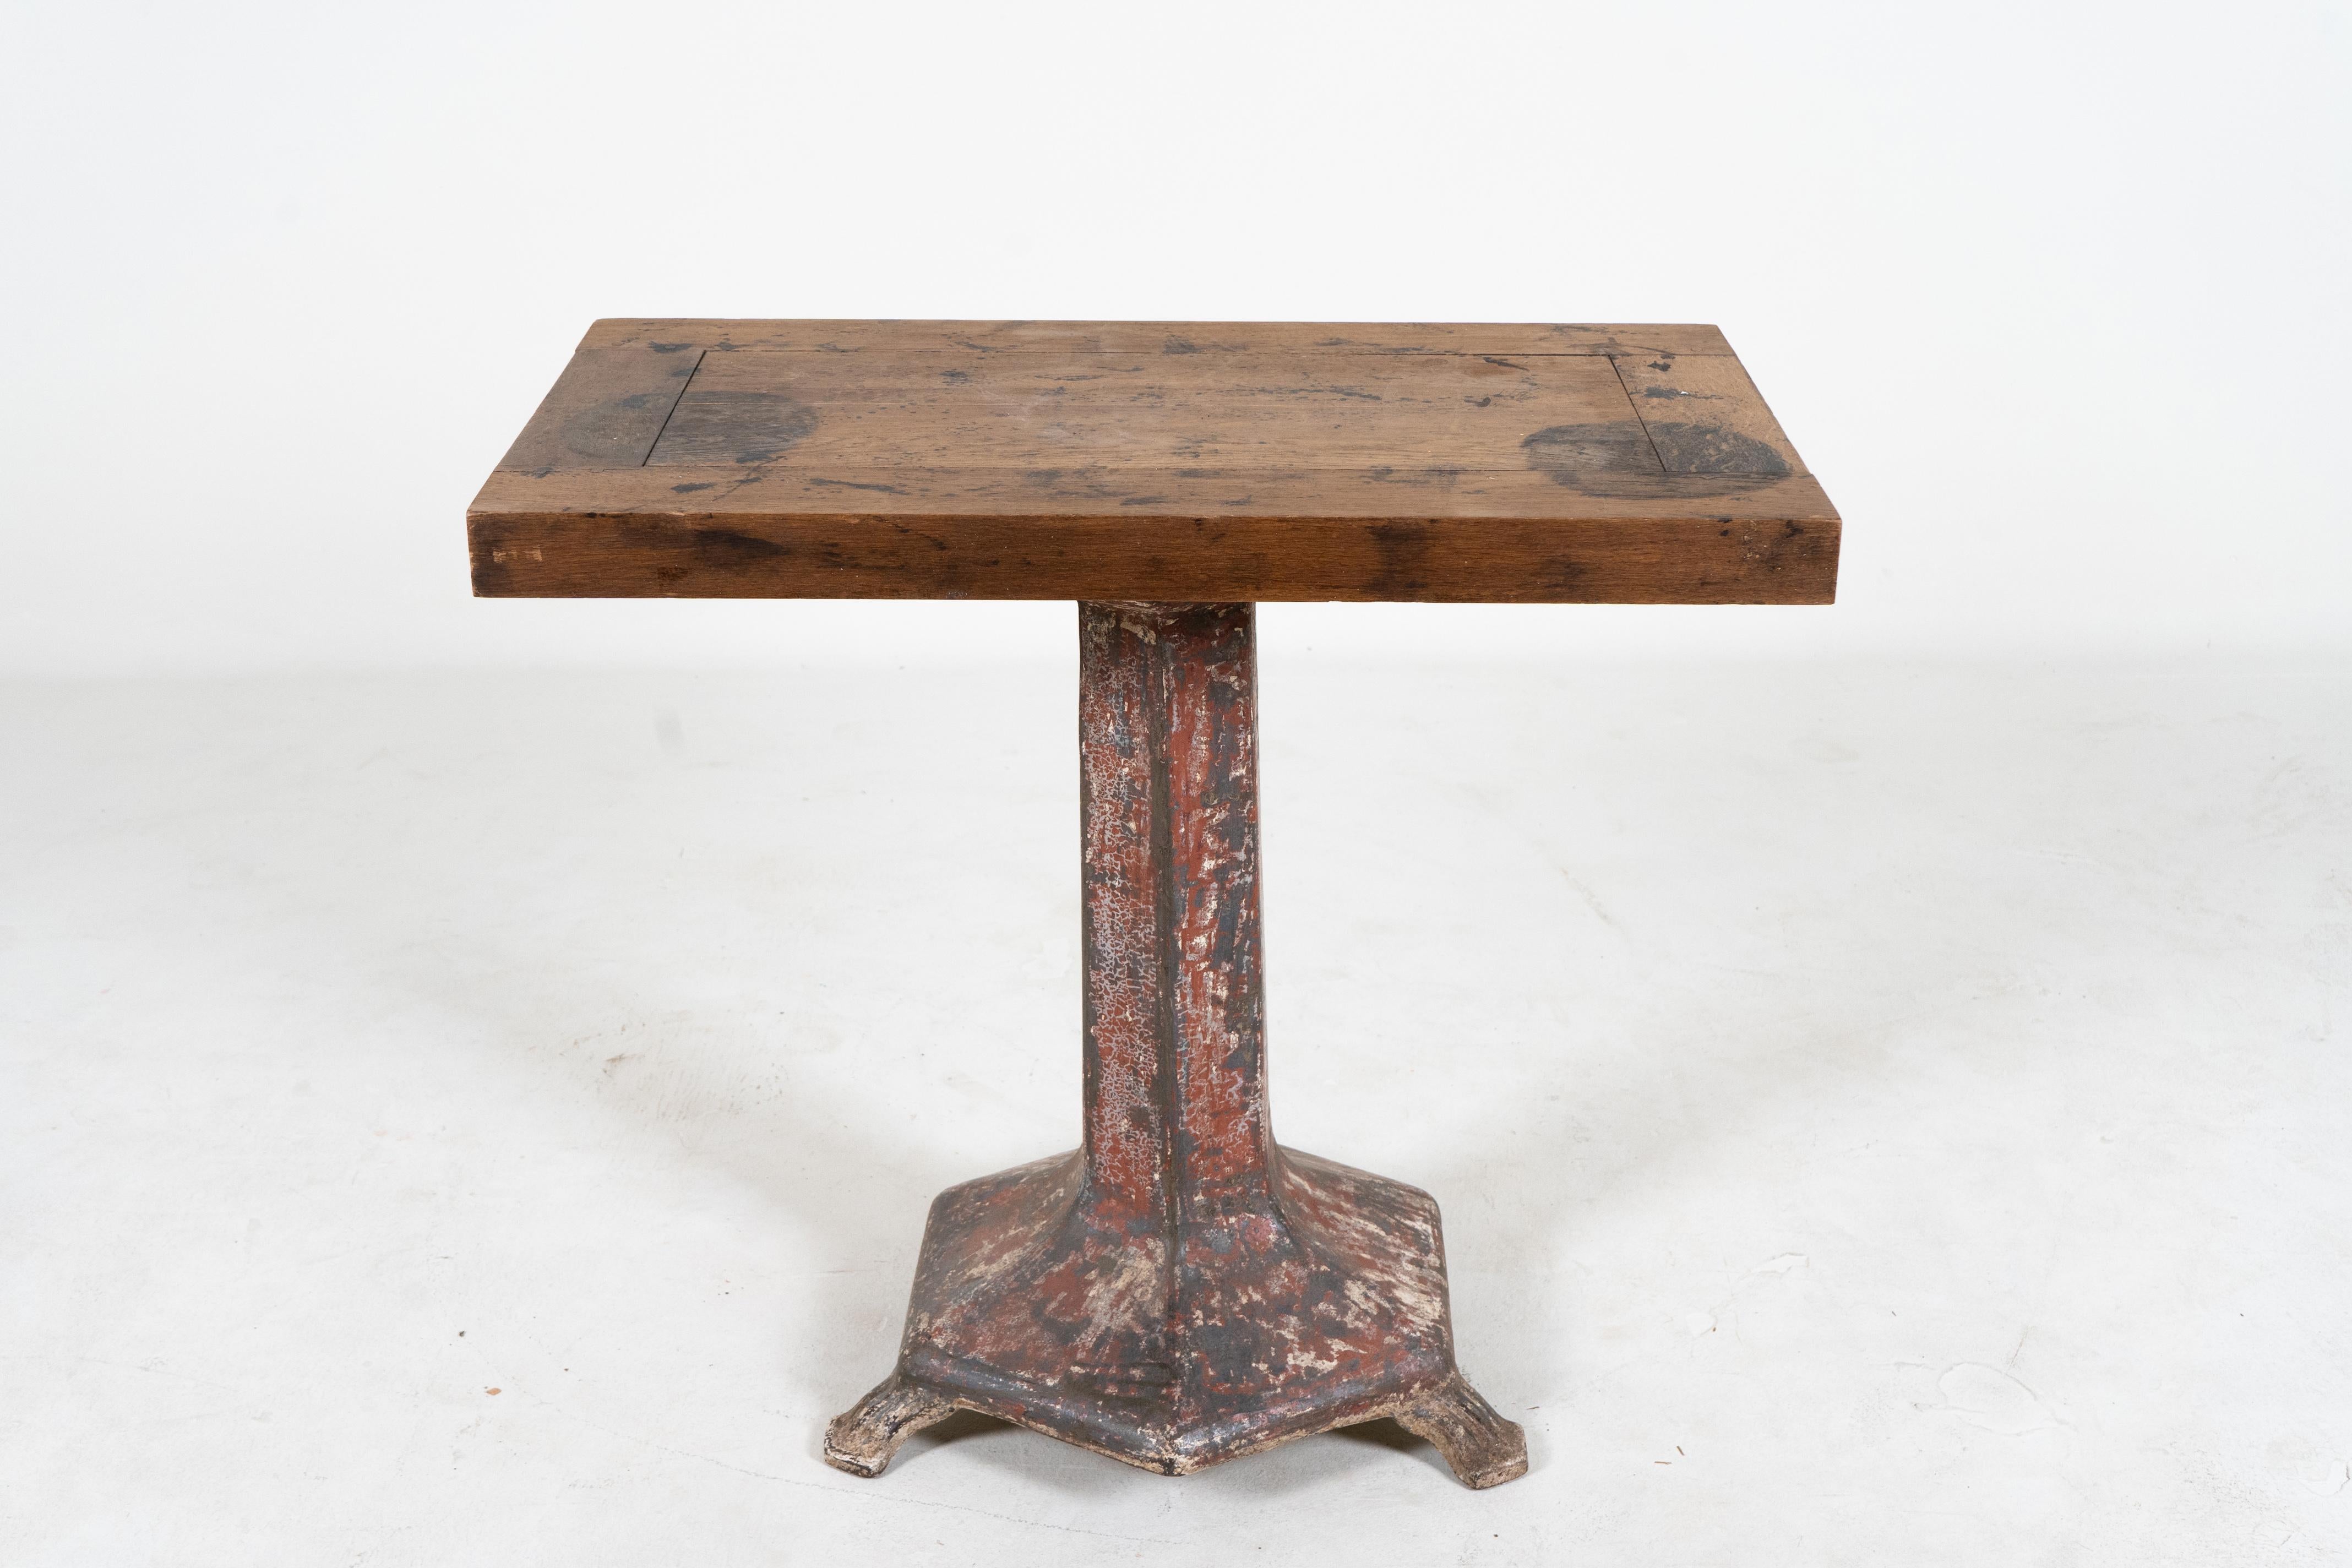 This unusually thick and sturdy oak table rests on a heavy iron base. It was used in a garment factory and the lack of corner legs allowed full movement and avoided snags. The top is quite smooth, very heavy and covered in minor scratches, stains